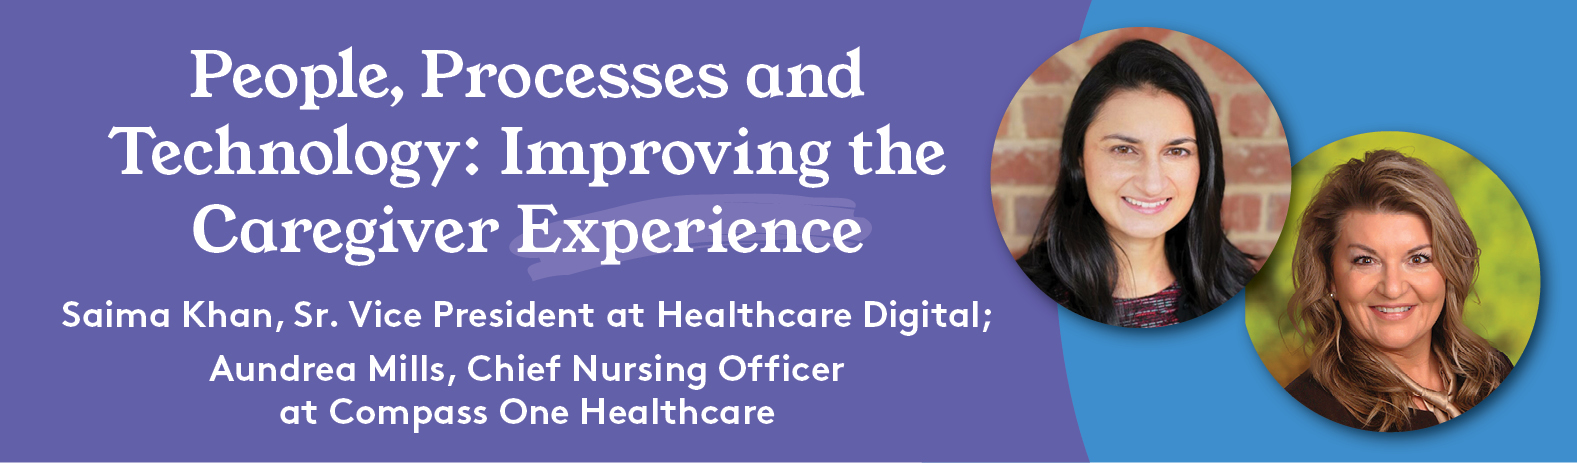 People, Processes and Technology: Improving the Caregiver Experience